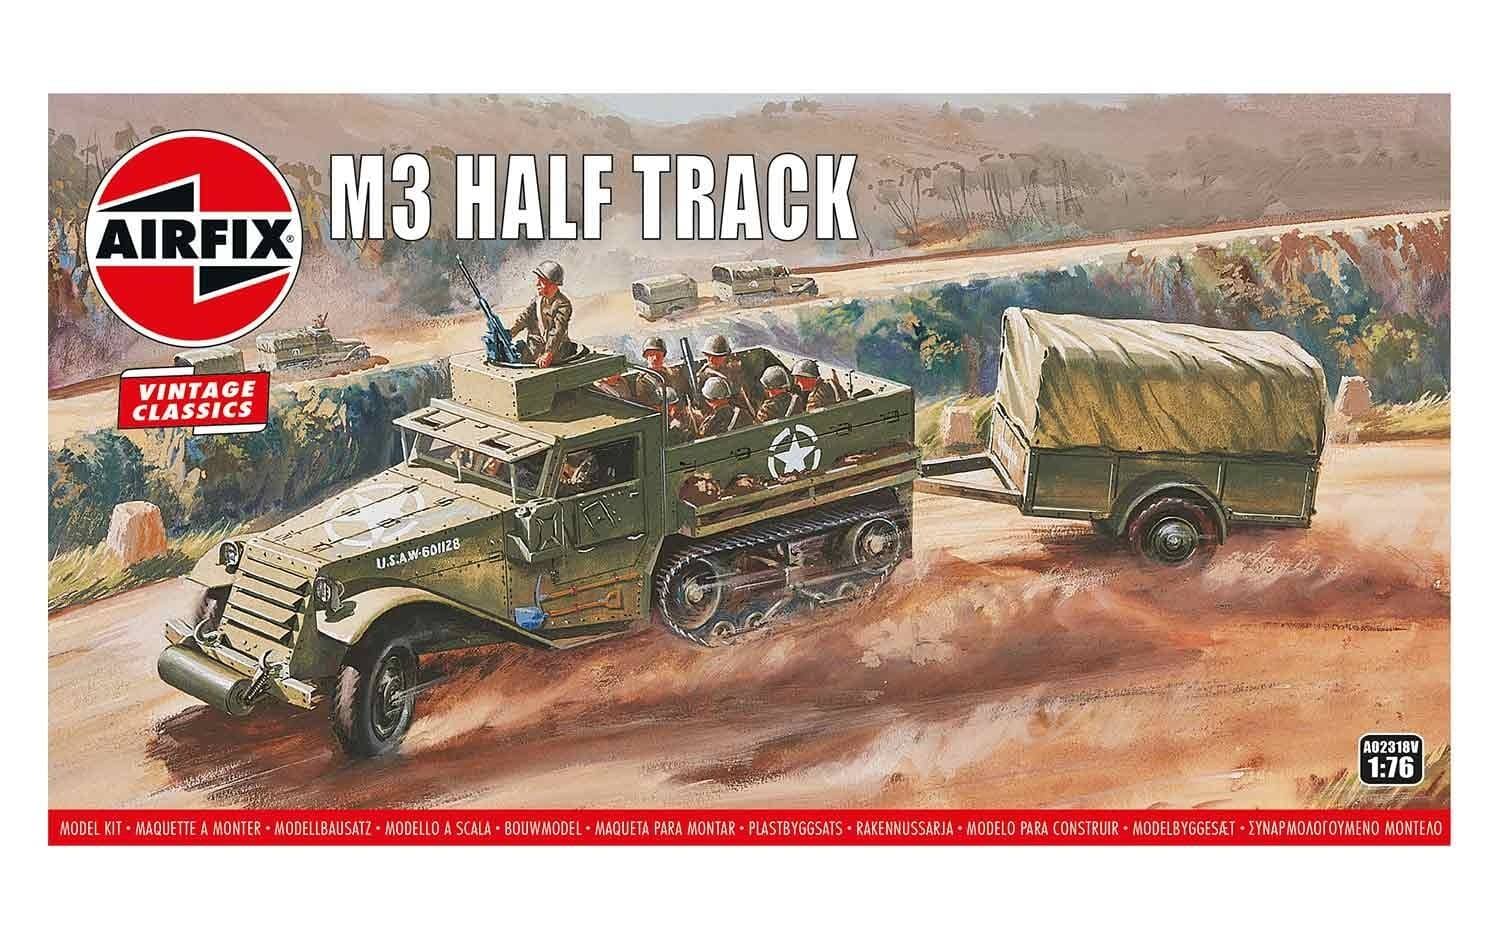 4D 1/72 scale WWII US Army M3A1 Half Track Military model kit 